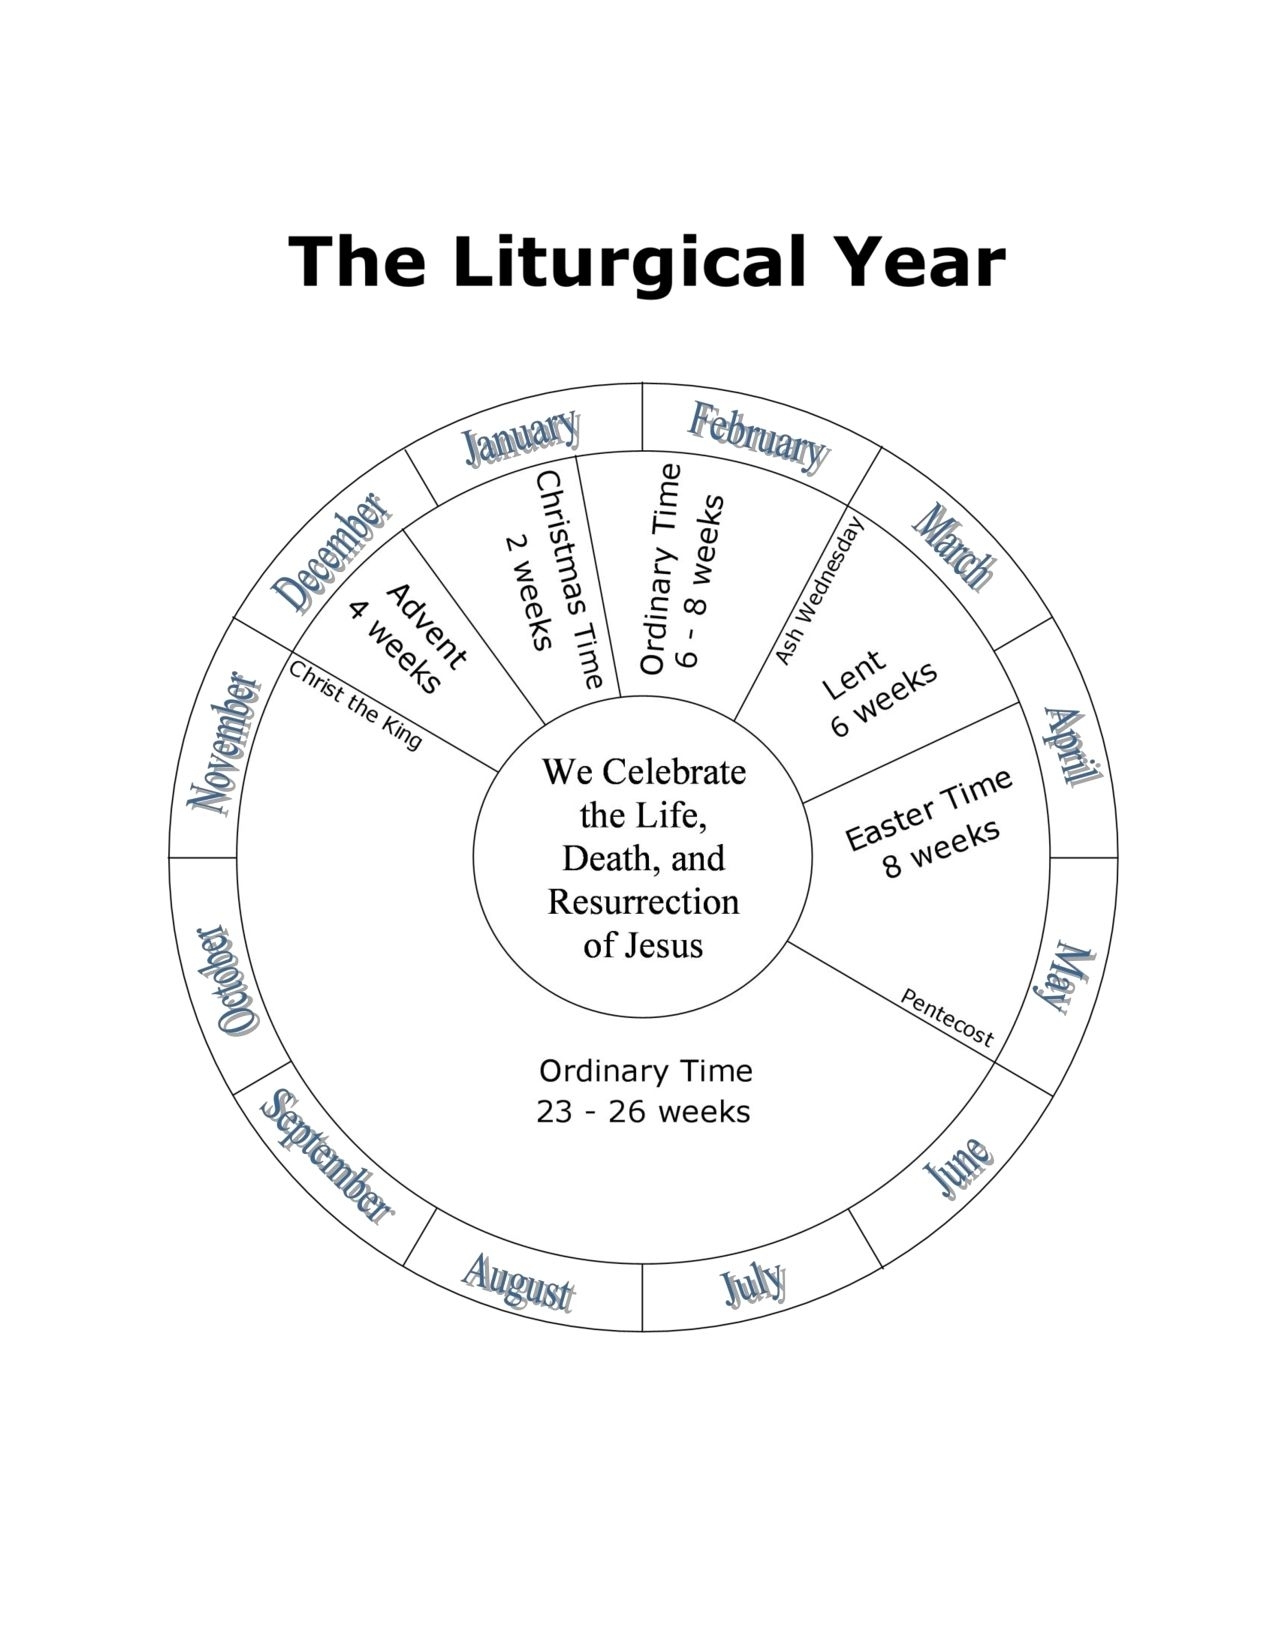 Liturgical Year 2020 Lesson Plan In 2020 | Catholic